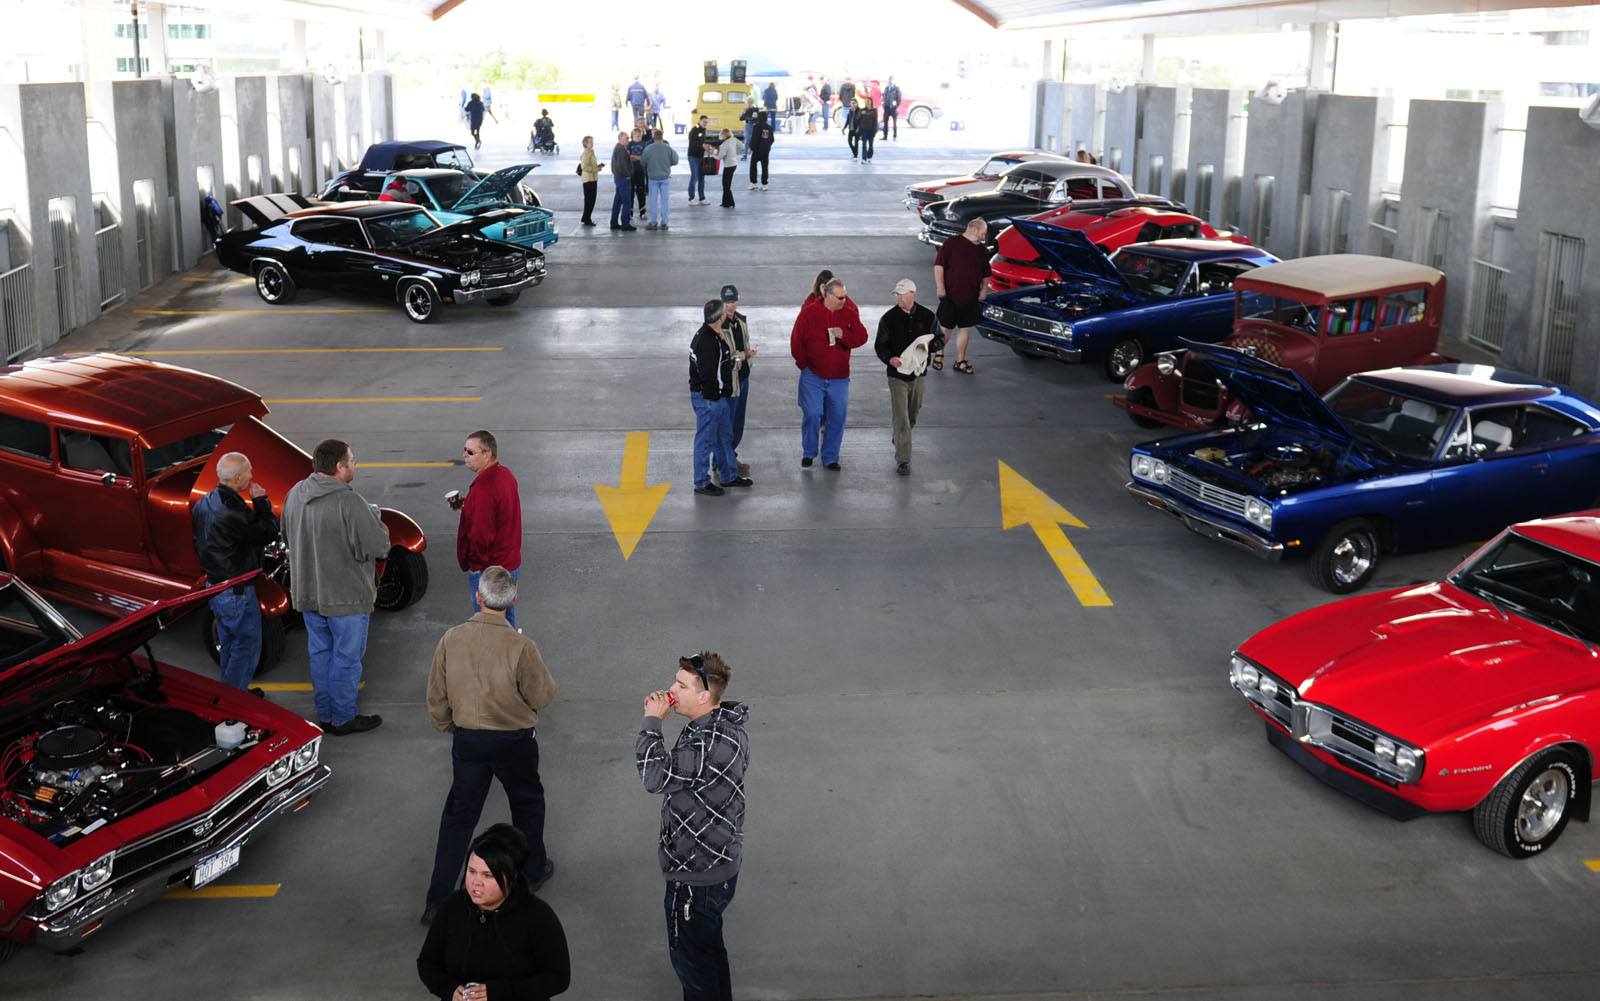 The official opening of Sorensen Station and Transit Terminal was celebrated over the weekend with Crusin' the Parkade. Classic cars were lined up in the parkade and a barbeque was held with all proceeds going to the Red Deer Food Bank.